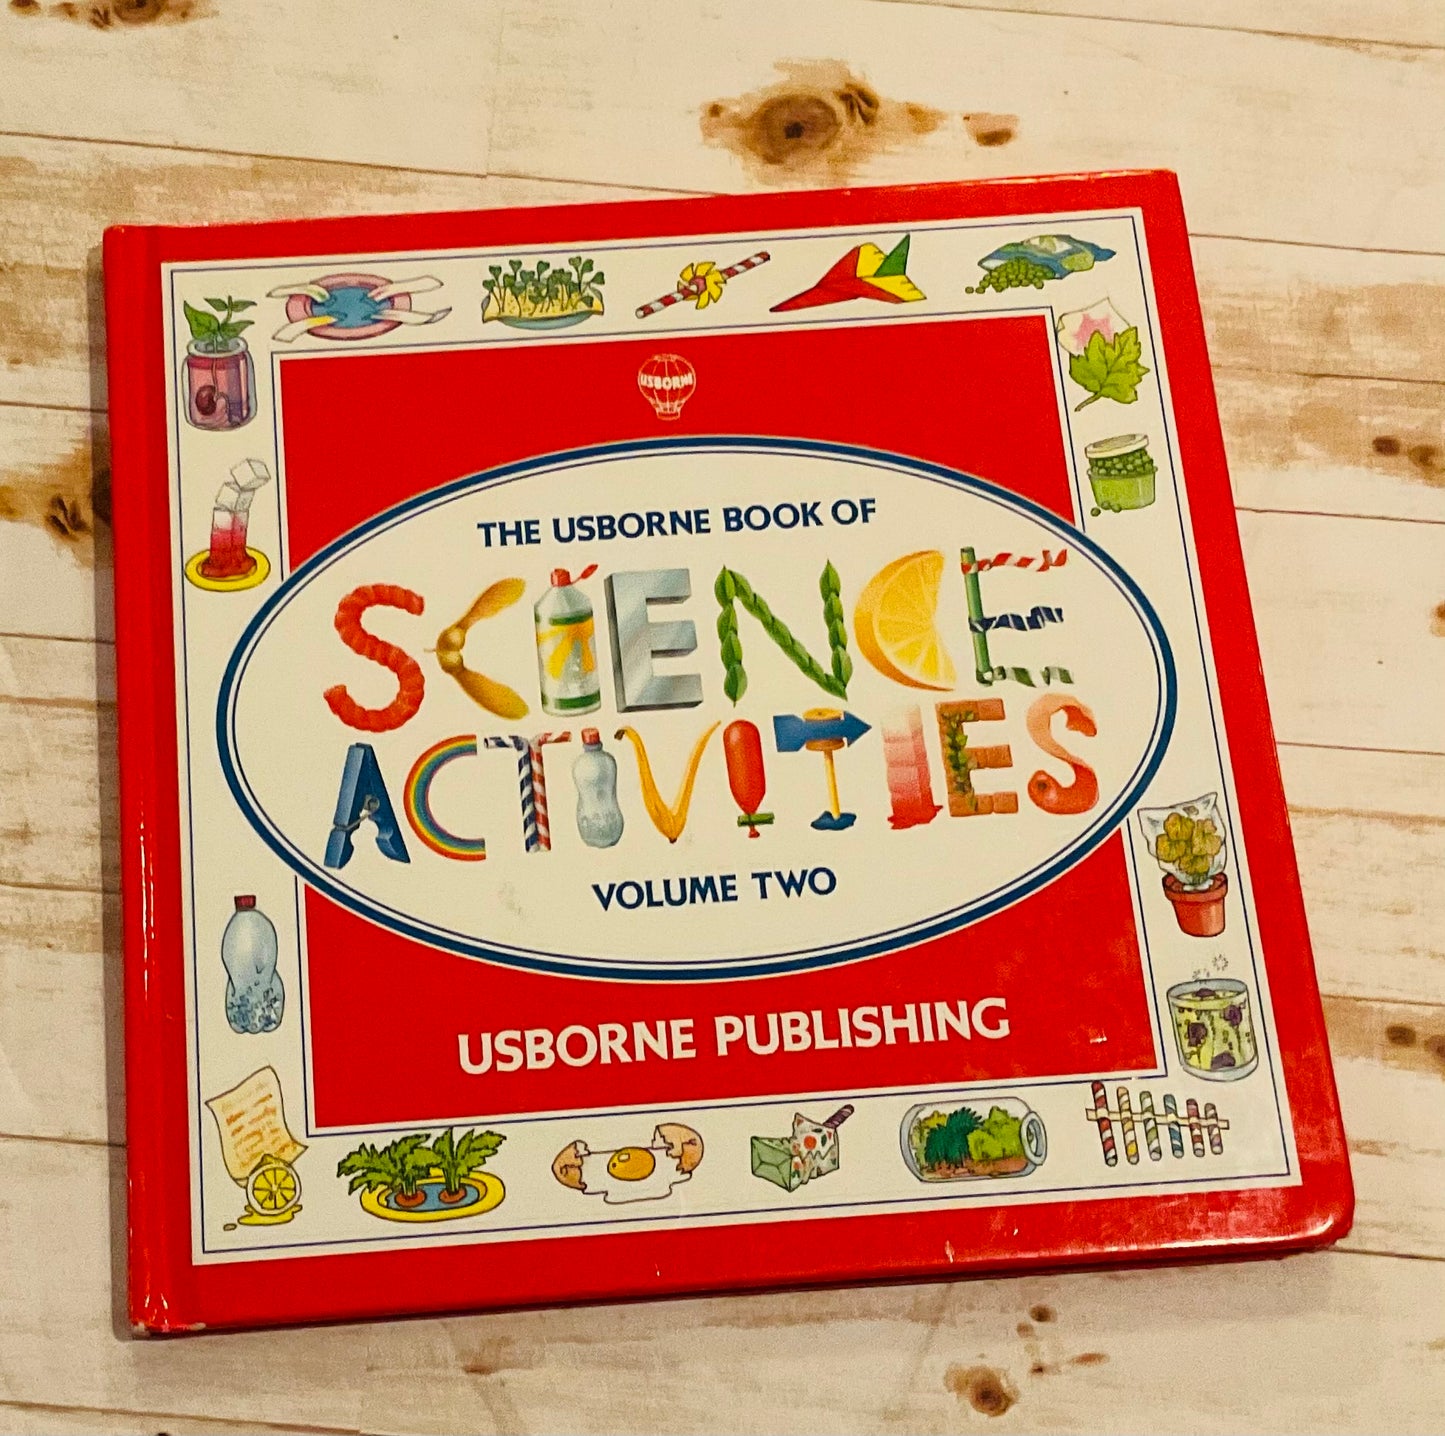 The Usborne Book of Science Activities Volume Two - Anchored Homeschool Resource Center